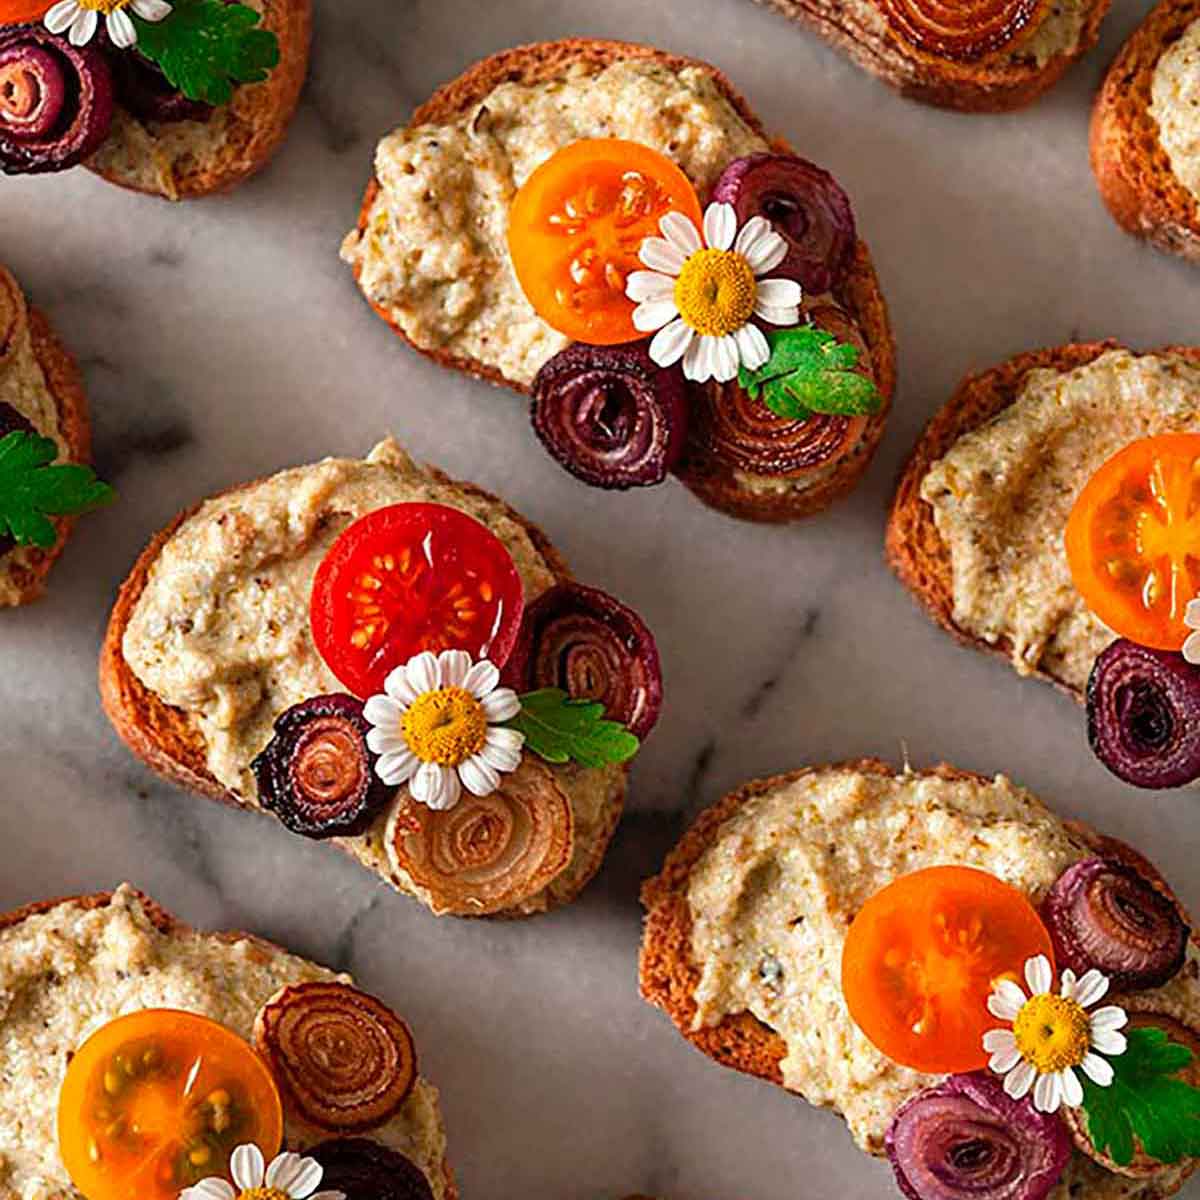 Crostini garnished with daisies, onions and tomatoes on a marble plate.